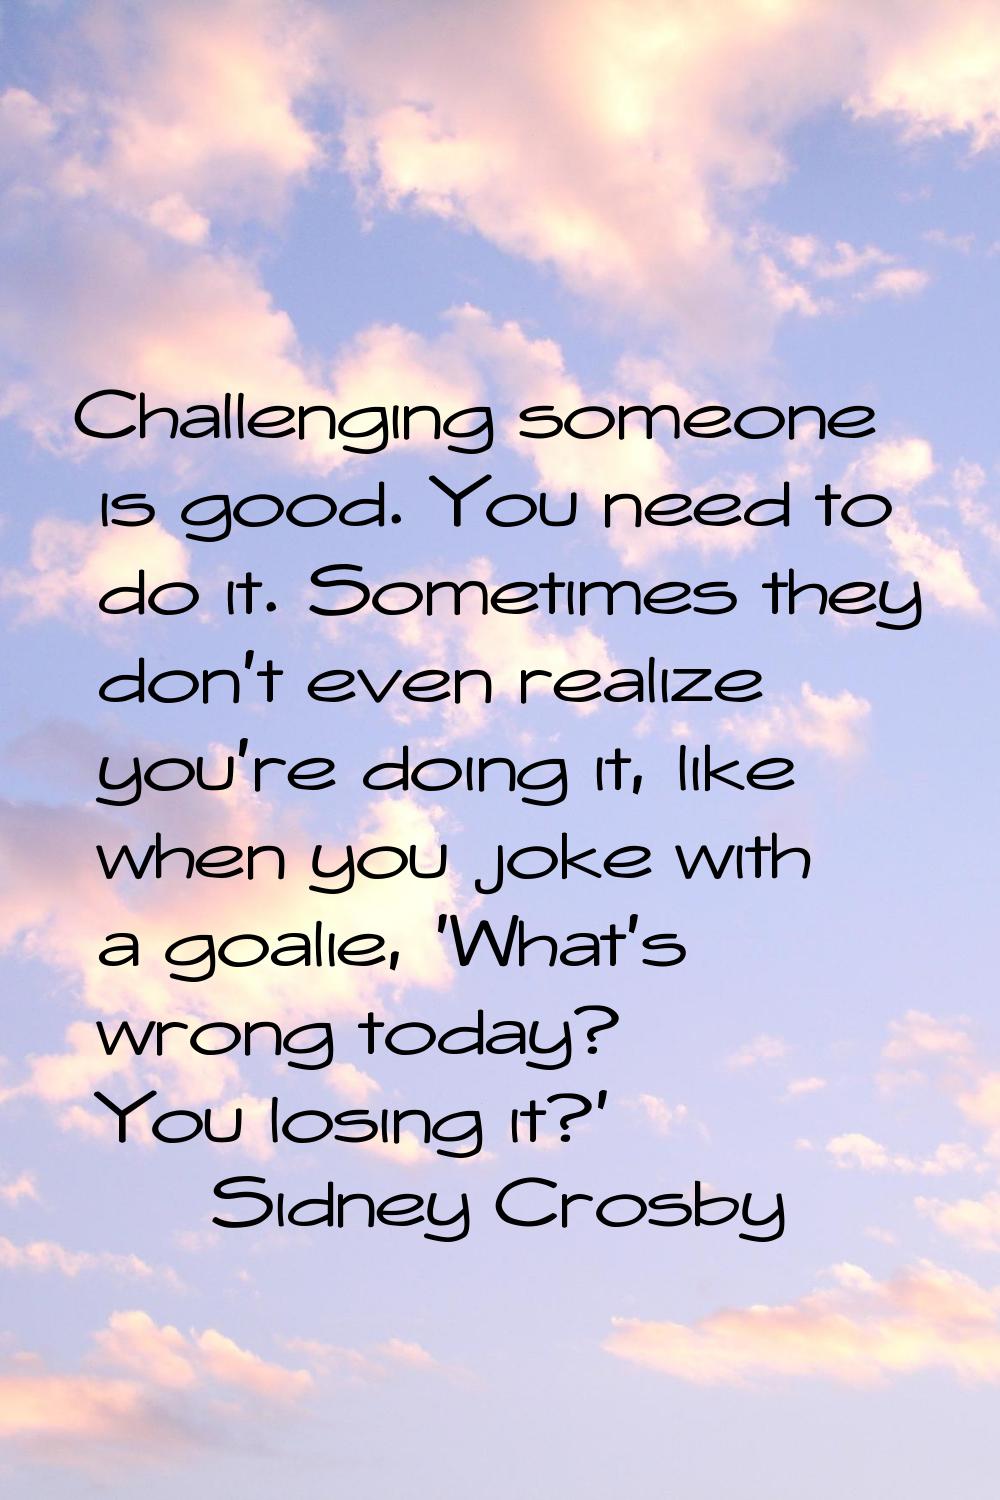 Challenging someone is good. You need to do it. Sometimes they don't even realize you're doing it, 